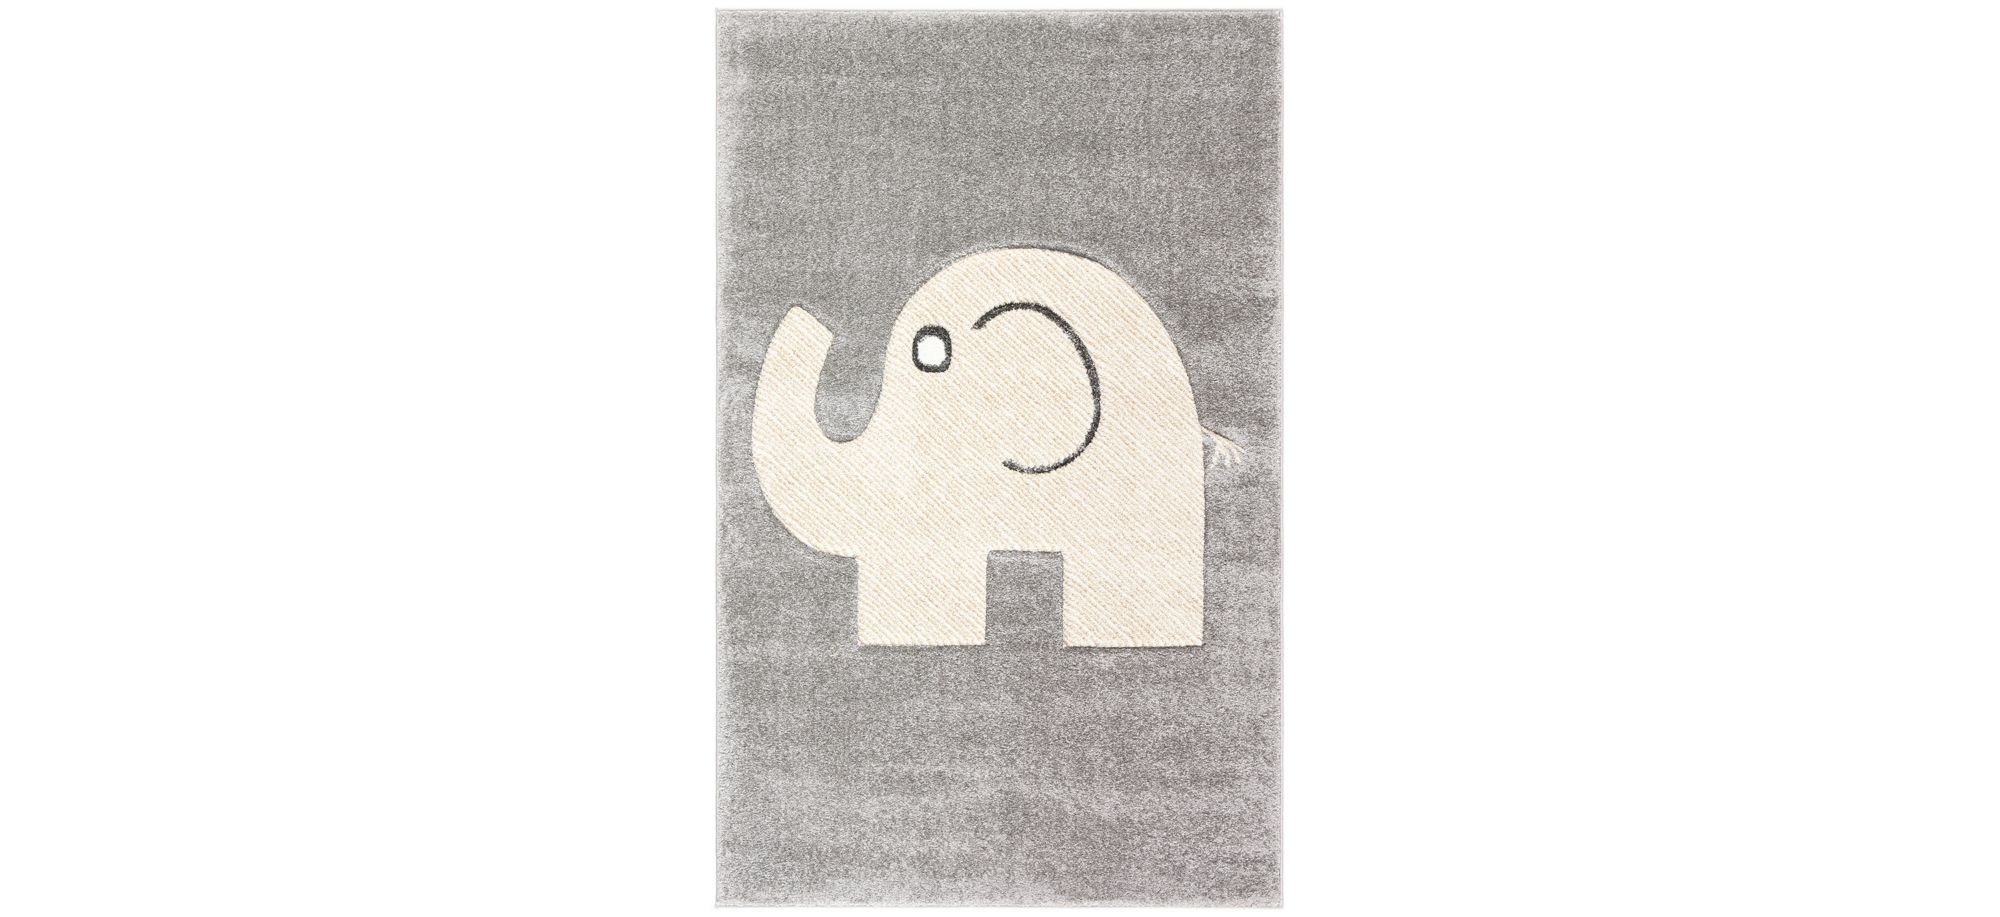 Carousel Baby Elephant Kids Area Rug in Gray & Ivory by Safavieh